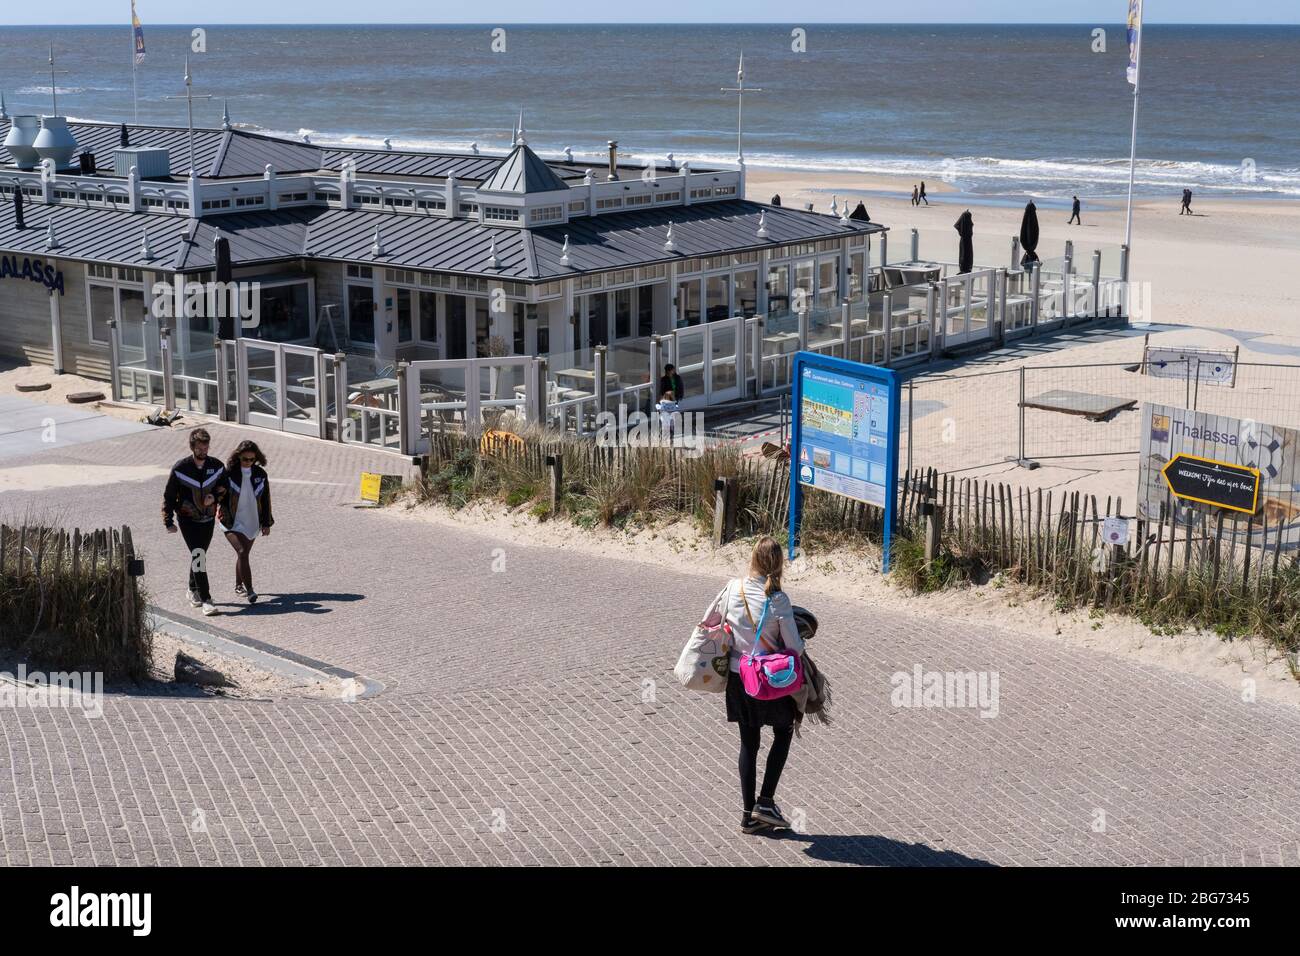 The beach of Zandvoort (known as Amsterdam Beach and for its Formule 1 Circuit) with few guests during the corona crisis. Stock Photo